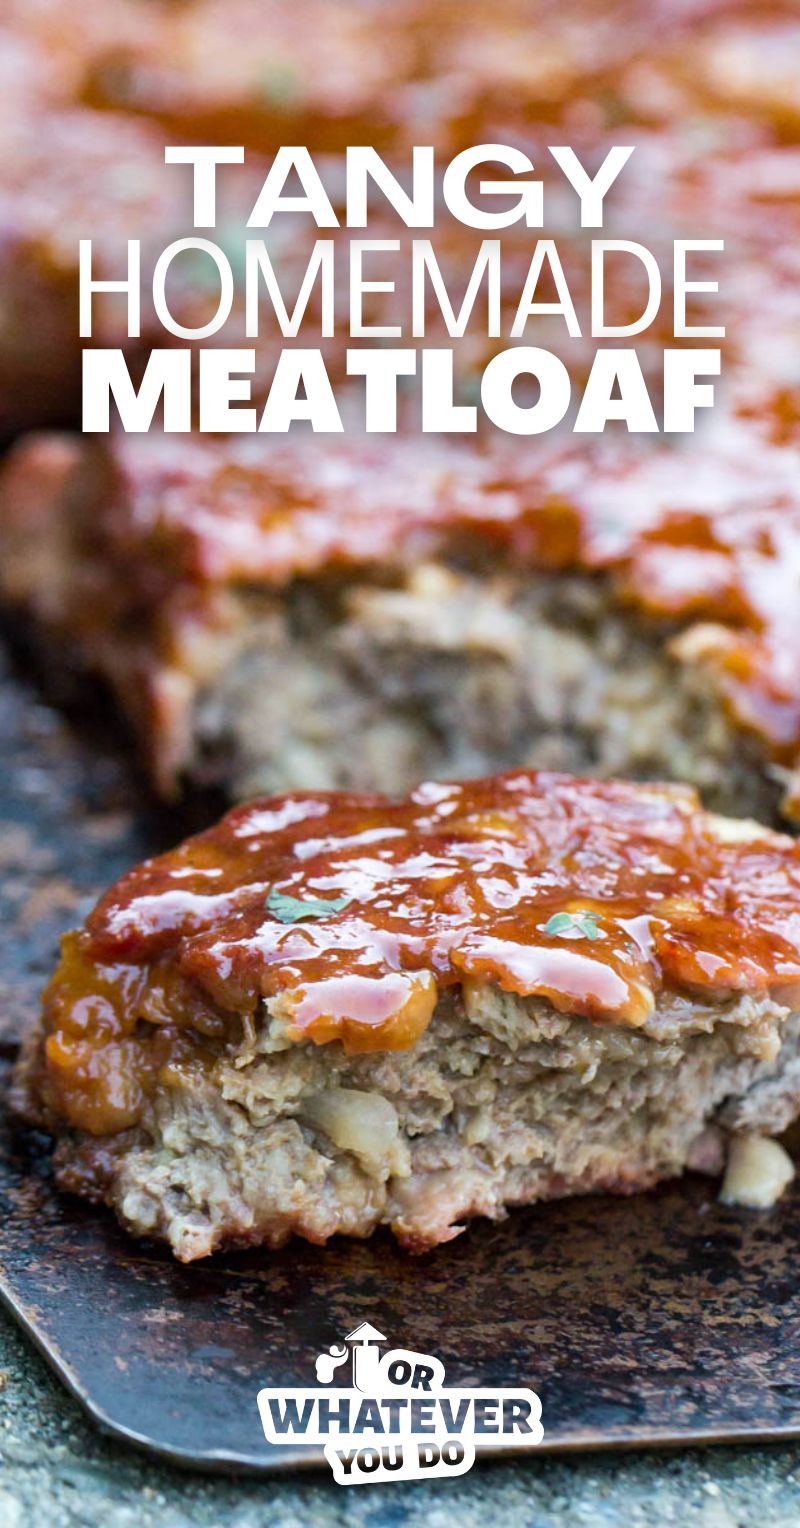 Tangy Homemade Meatloaf